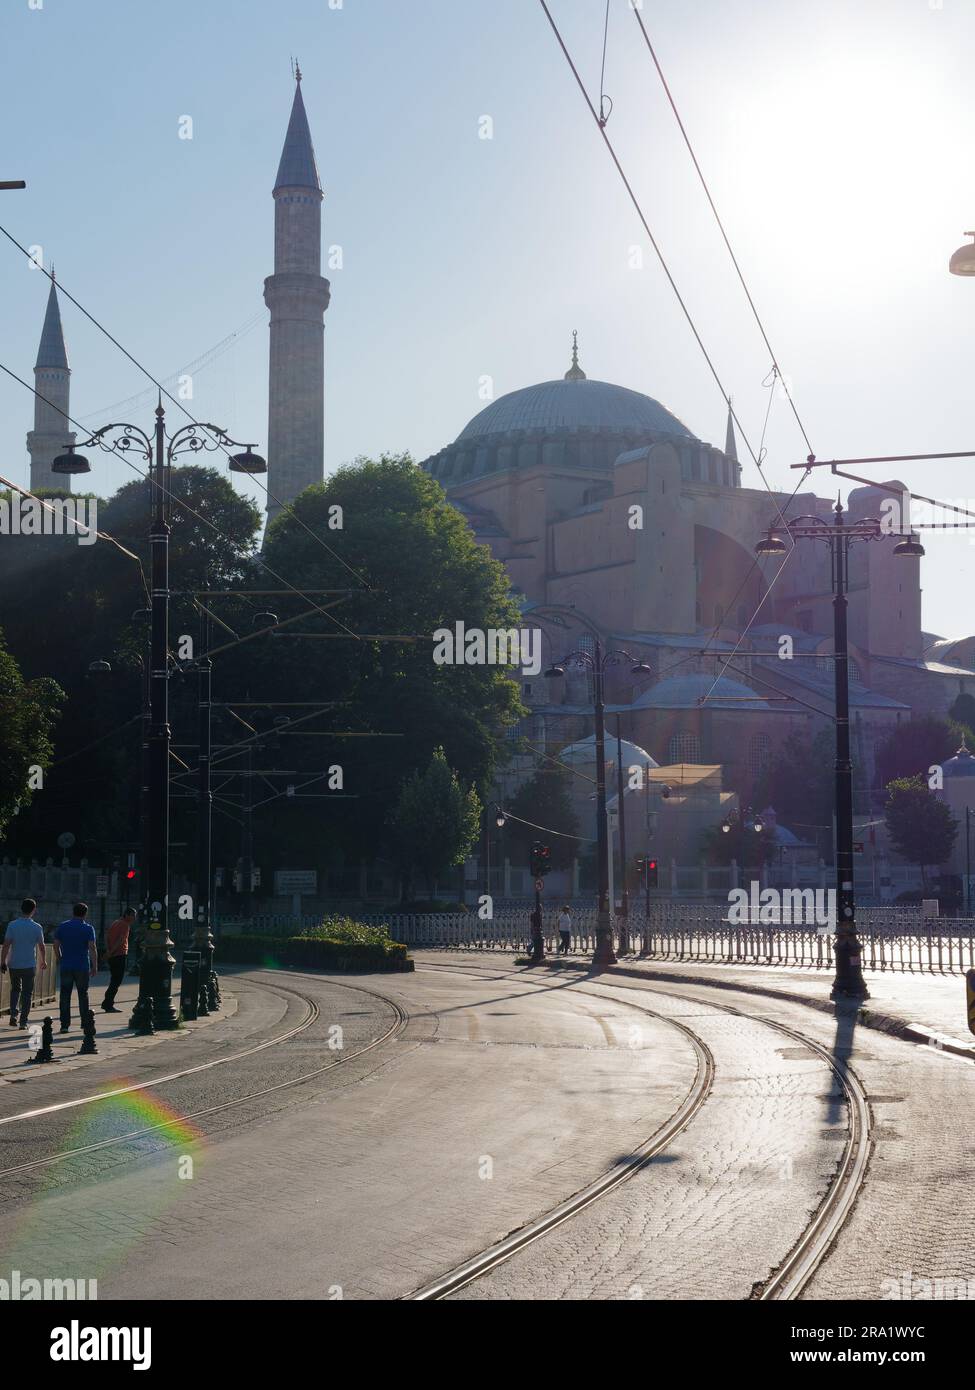 Tram tracks and the Hagia Sophia Mosque in the morning light, Sultanahmet neighbourhood, Istanbul, Turkey Stock Photo